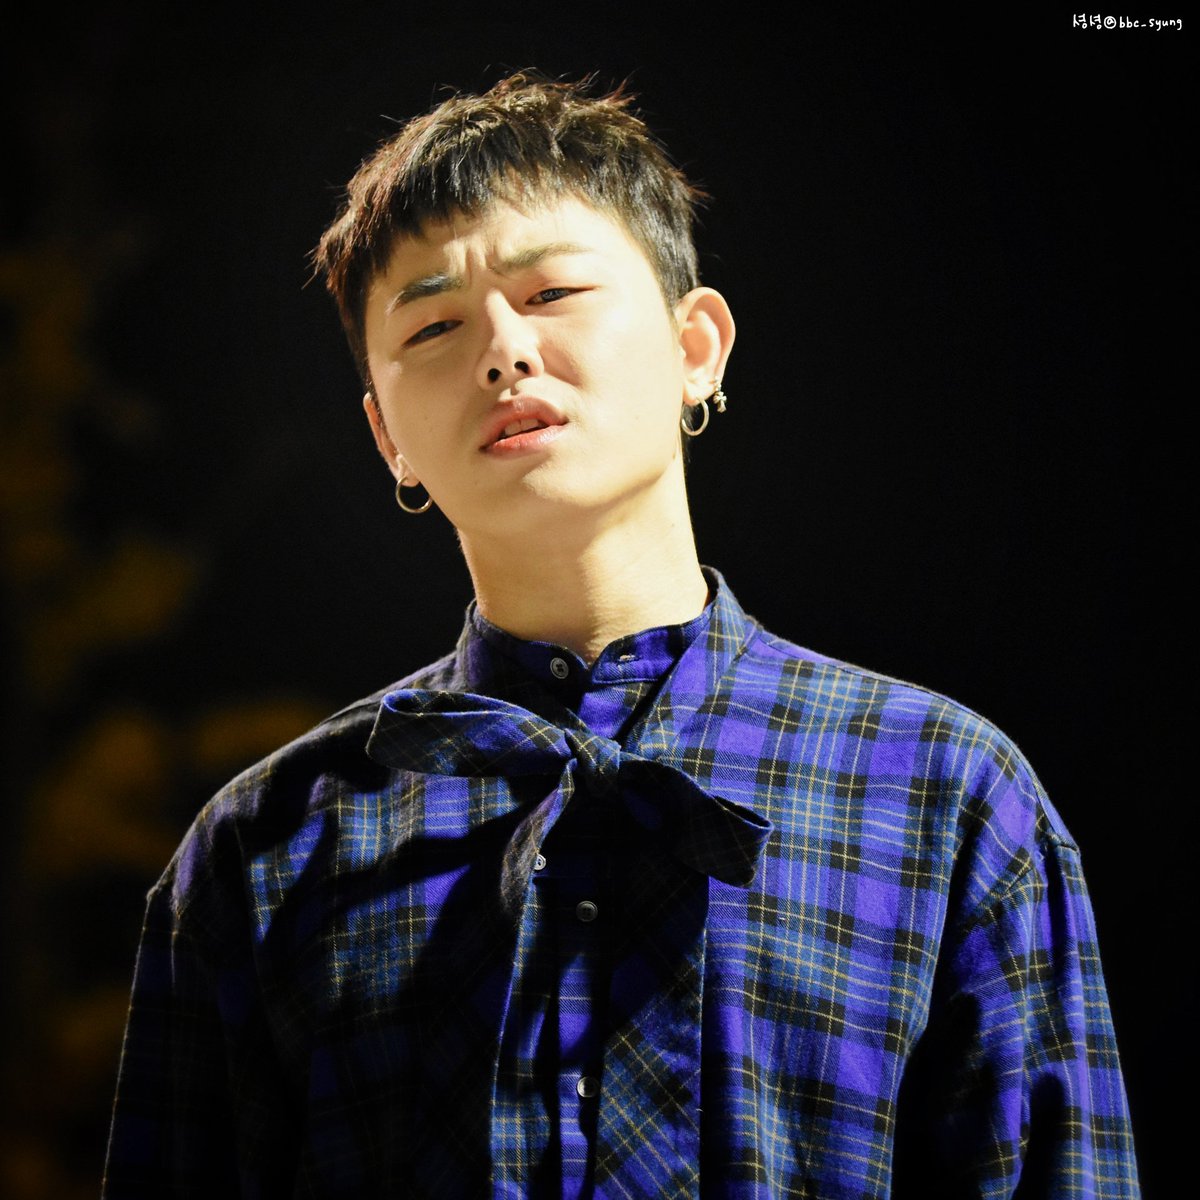 41.[3] a song that makes you cry: ZICO - ANTI 